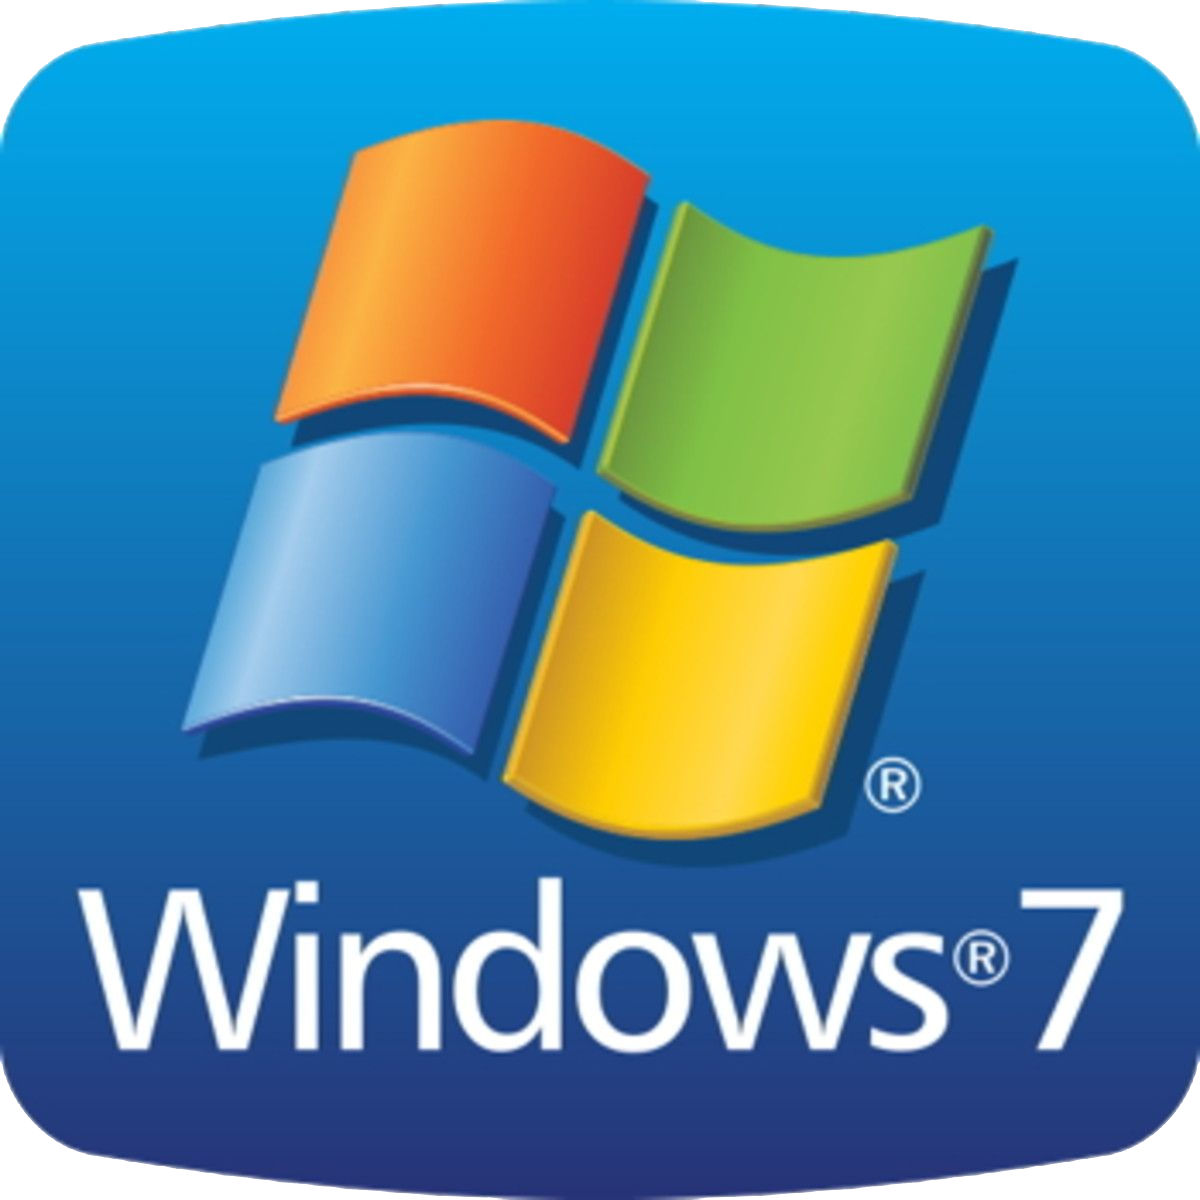 windows 7 service pack 2 release notes